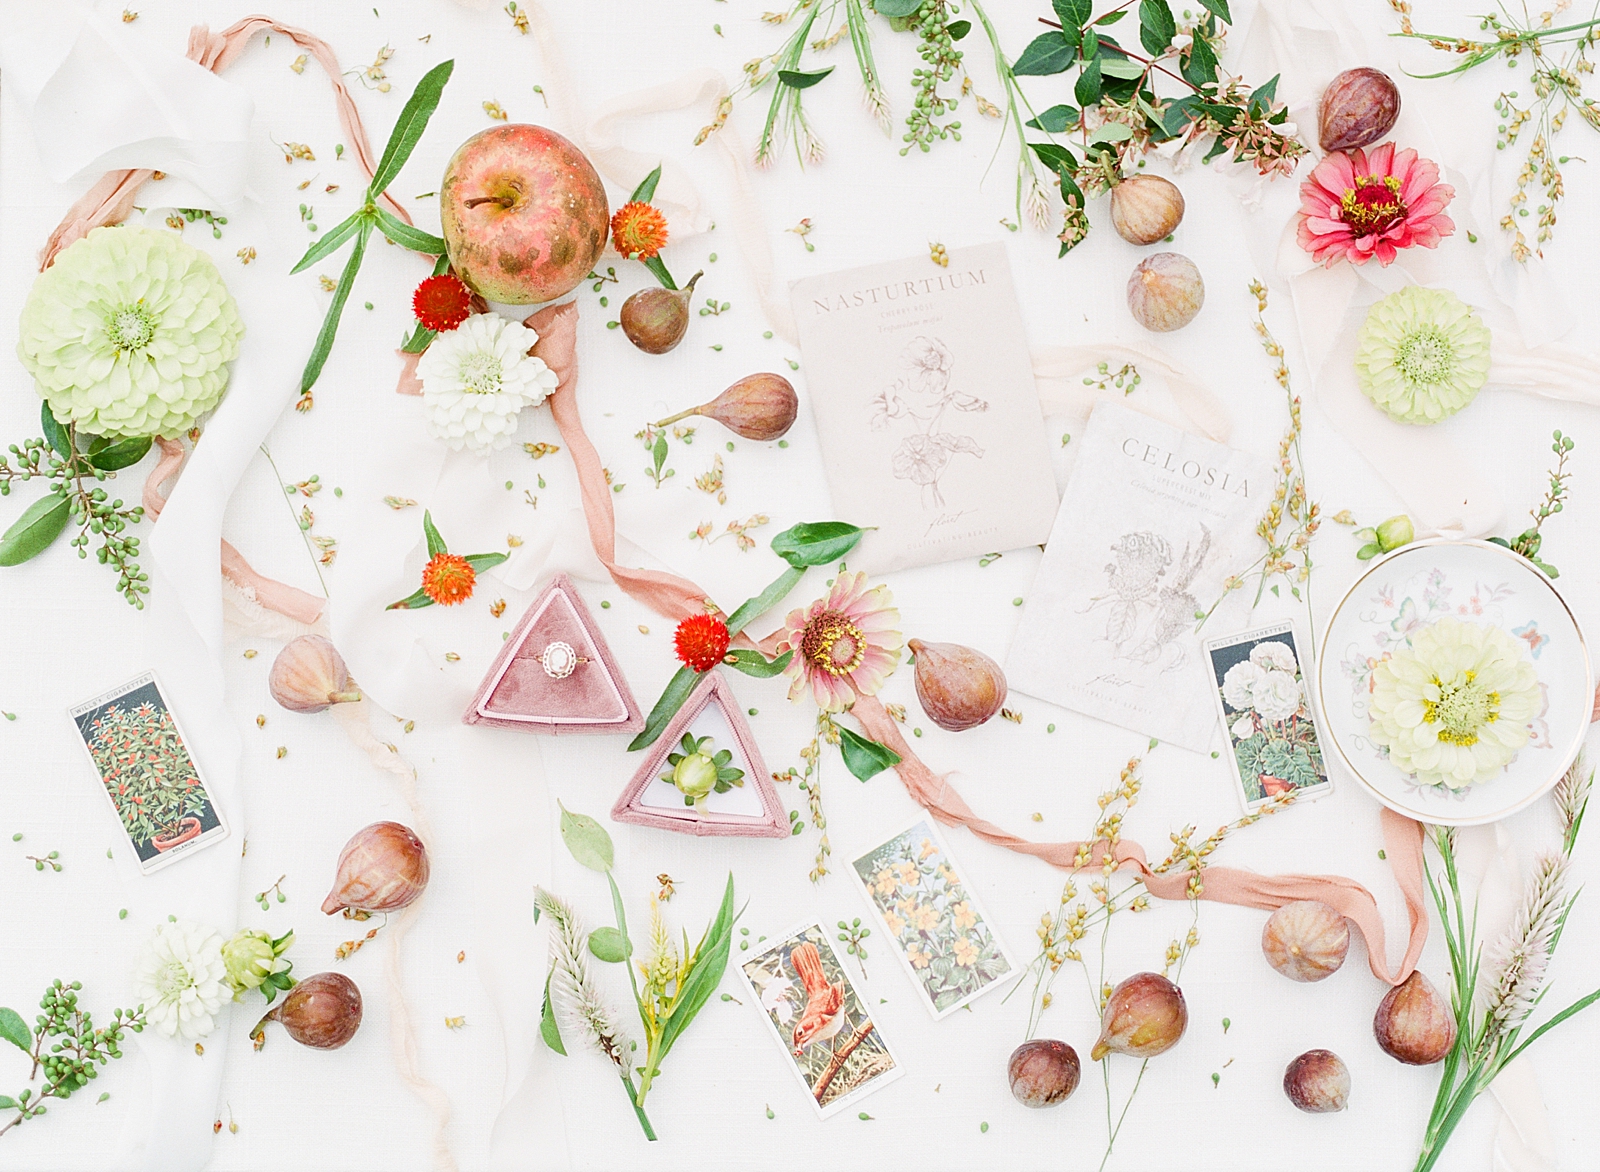 Birmingham Wedding Flat Lay with Figs and Flowers Photo